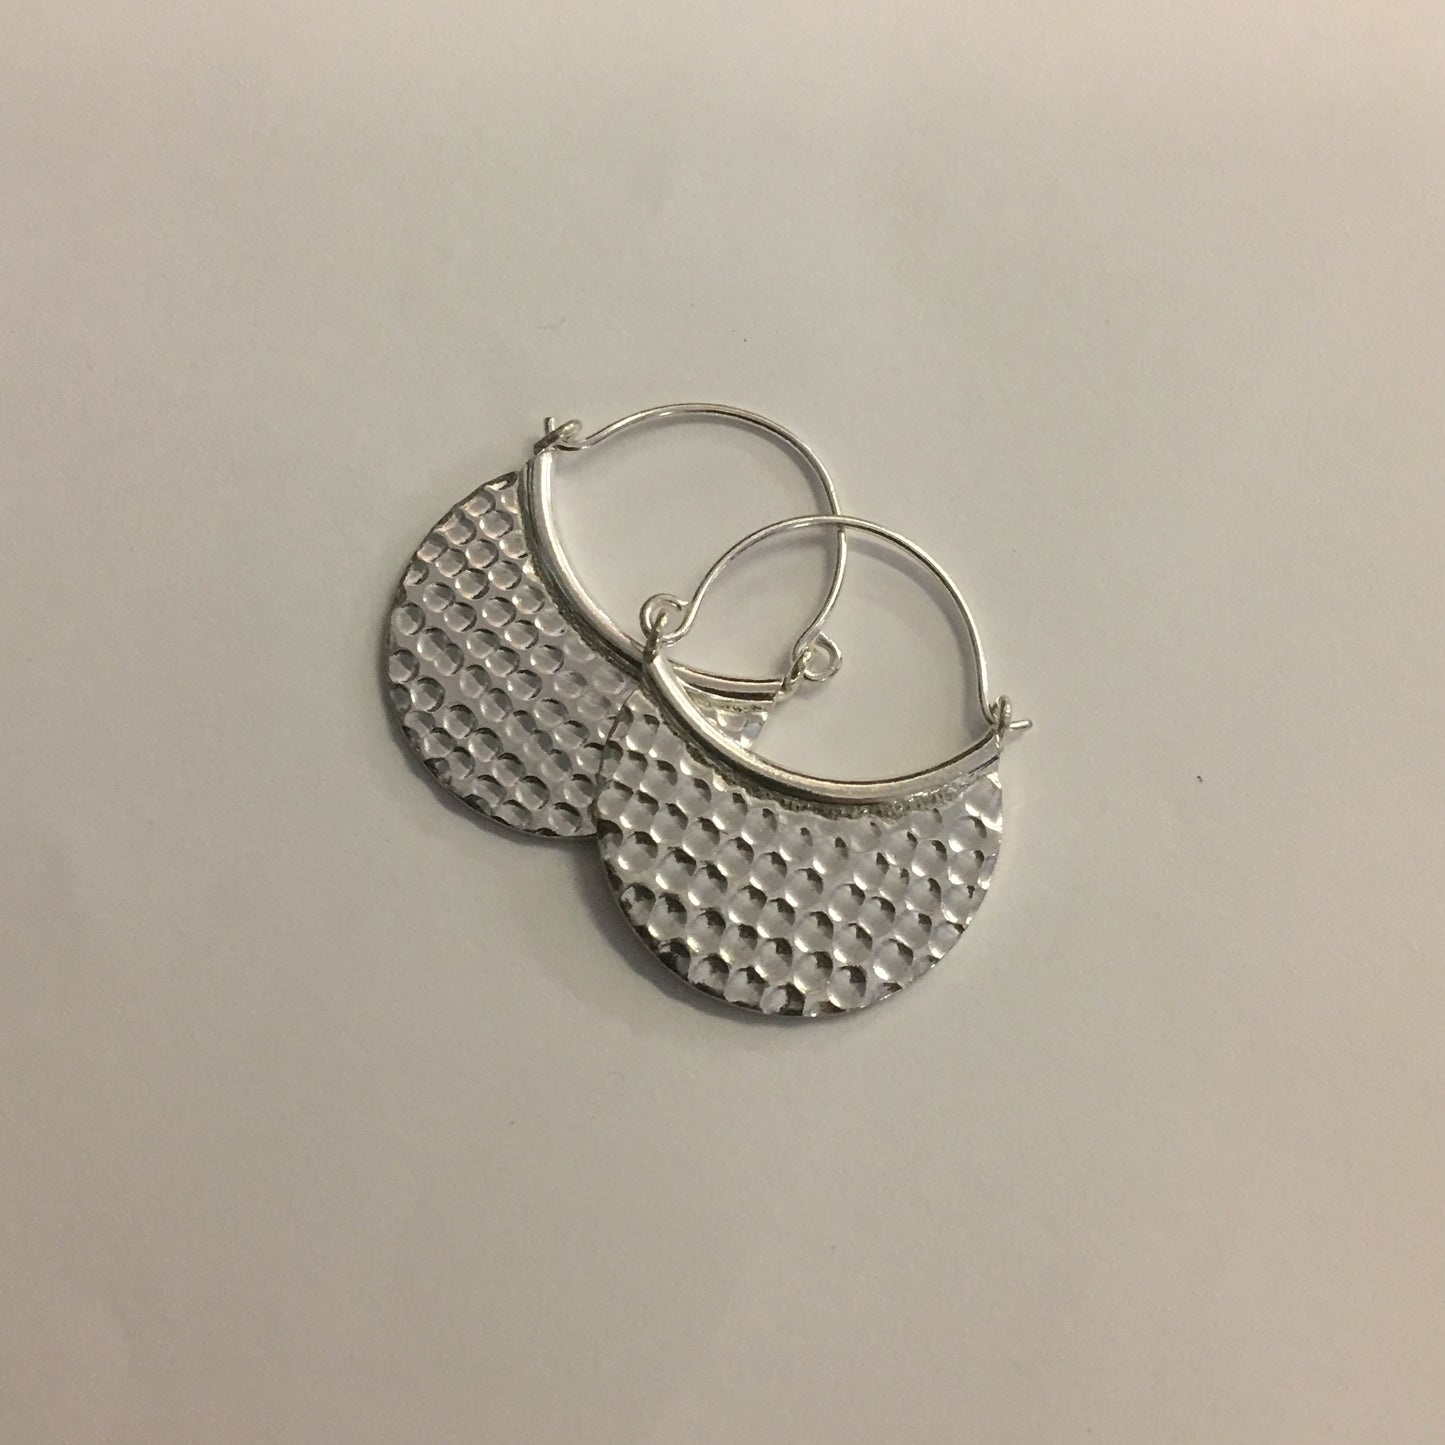 Silver Hammered Earring